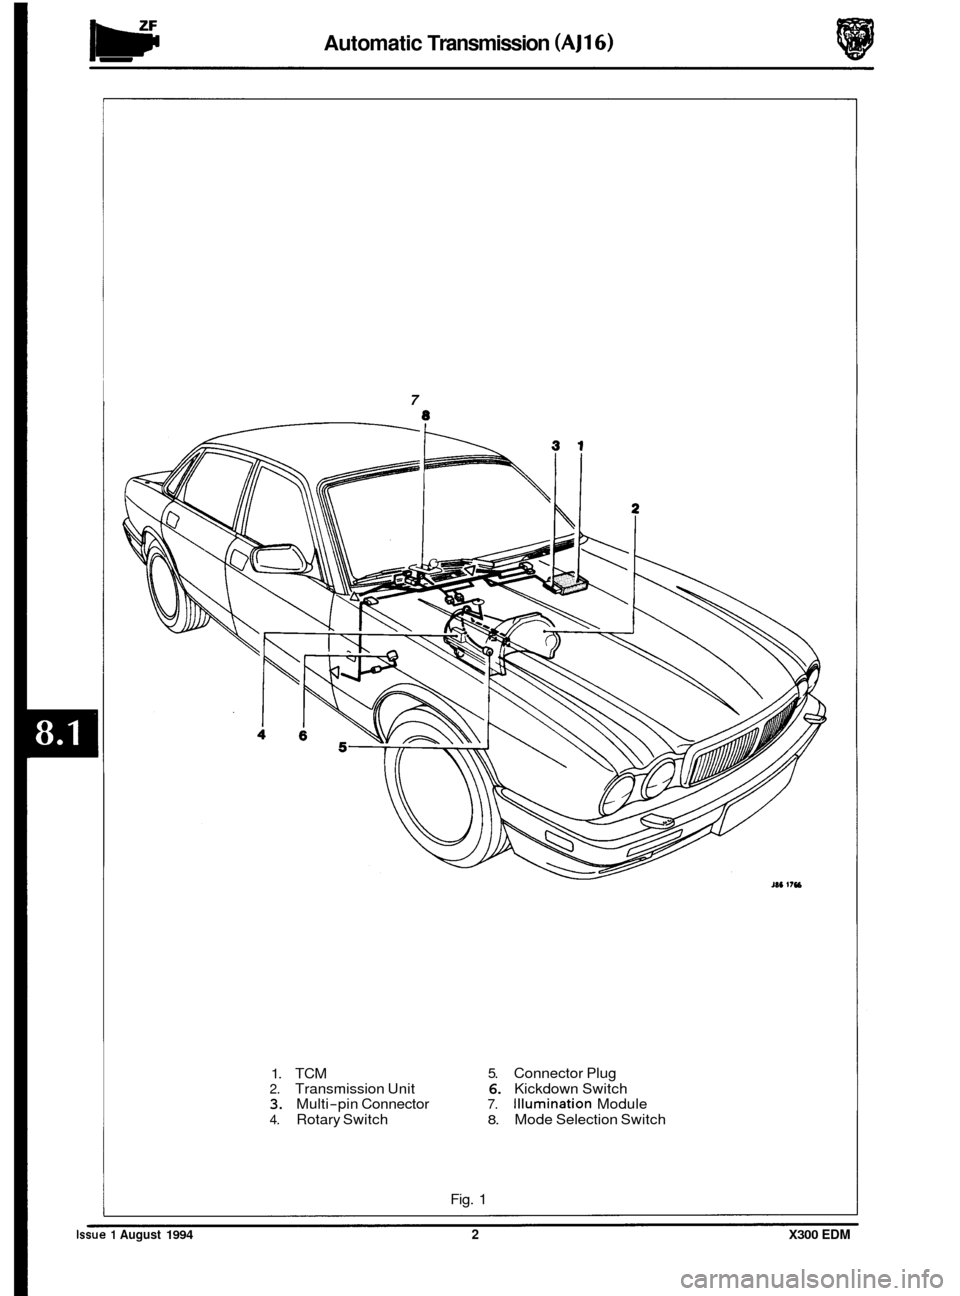 JAGUAR XJ6 1994 2.G Electrical Diagnostic Manual Automatic Transmission (AJ16) 
7 
1. TCM 5. Connector Plug 
2. Transmission  Unit 6. Kickdown Switch 3. Multi-pin Connector 7. Illumination Module 
4. Rotary  Switch 8. Mode Selection  Switch 
Fig. 
1